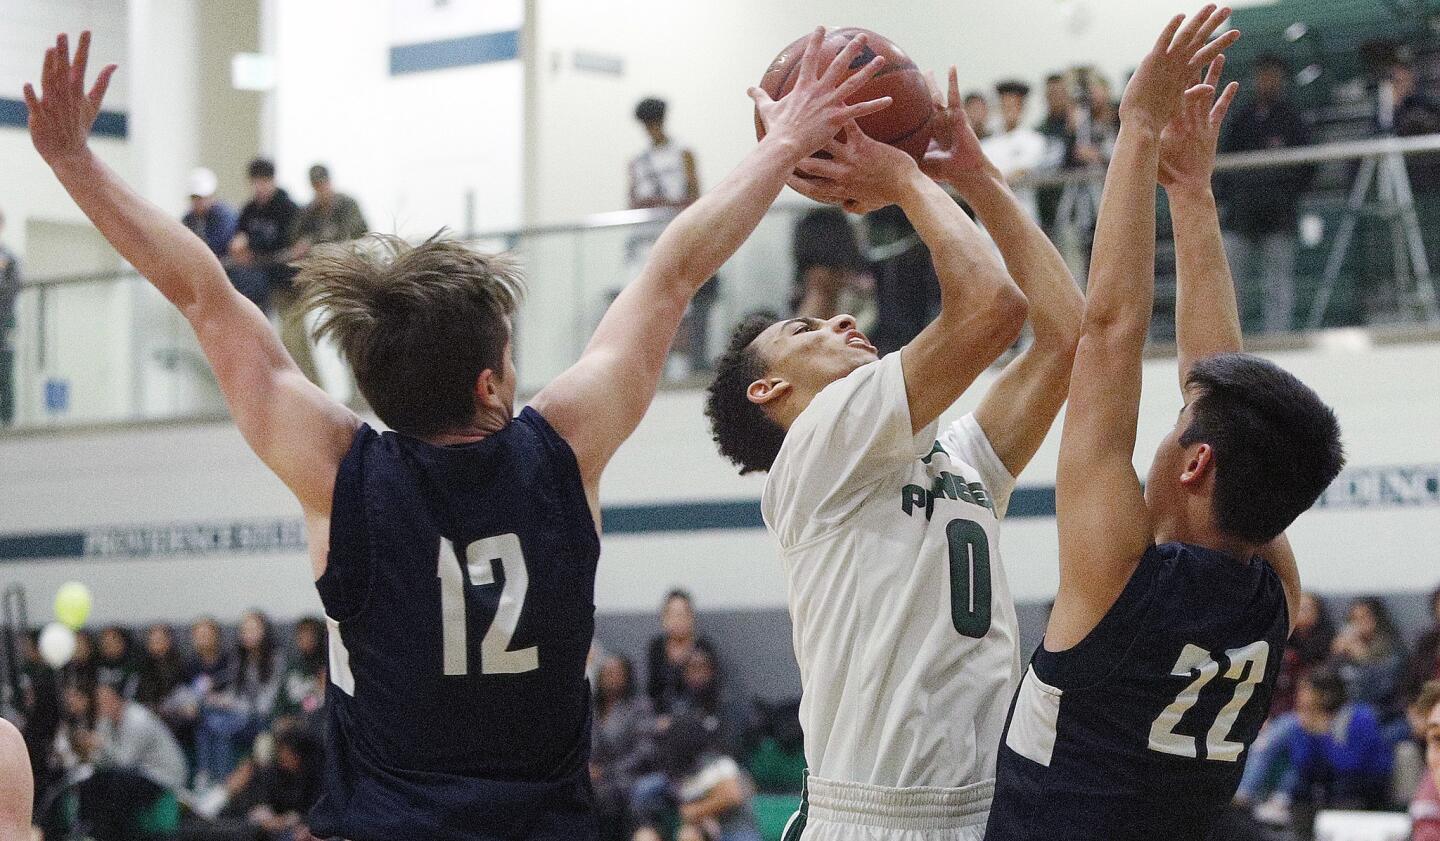 Providence's Jordan Shelley gets to the basket to shoot under defensive pressure from Flintridge Prep's Kevin Ashworth and Zach Kim in a Prep League boys' basketball game at Providence High School auditorium on Tuesday, January 22, 2019.